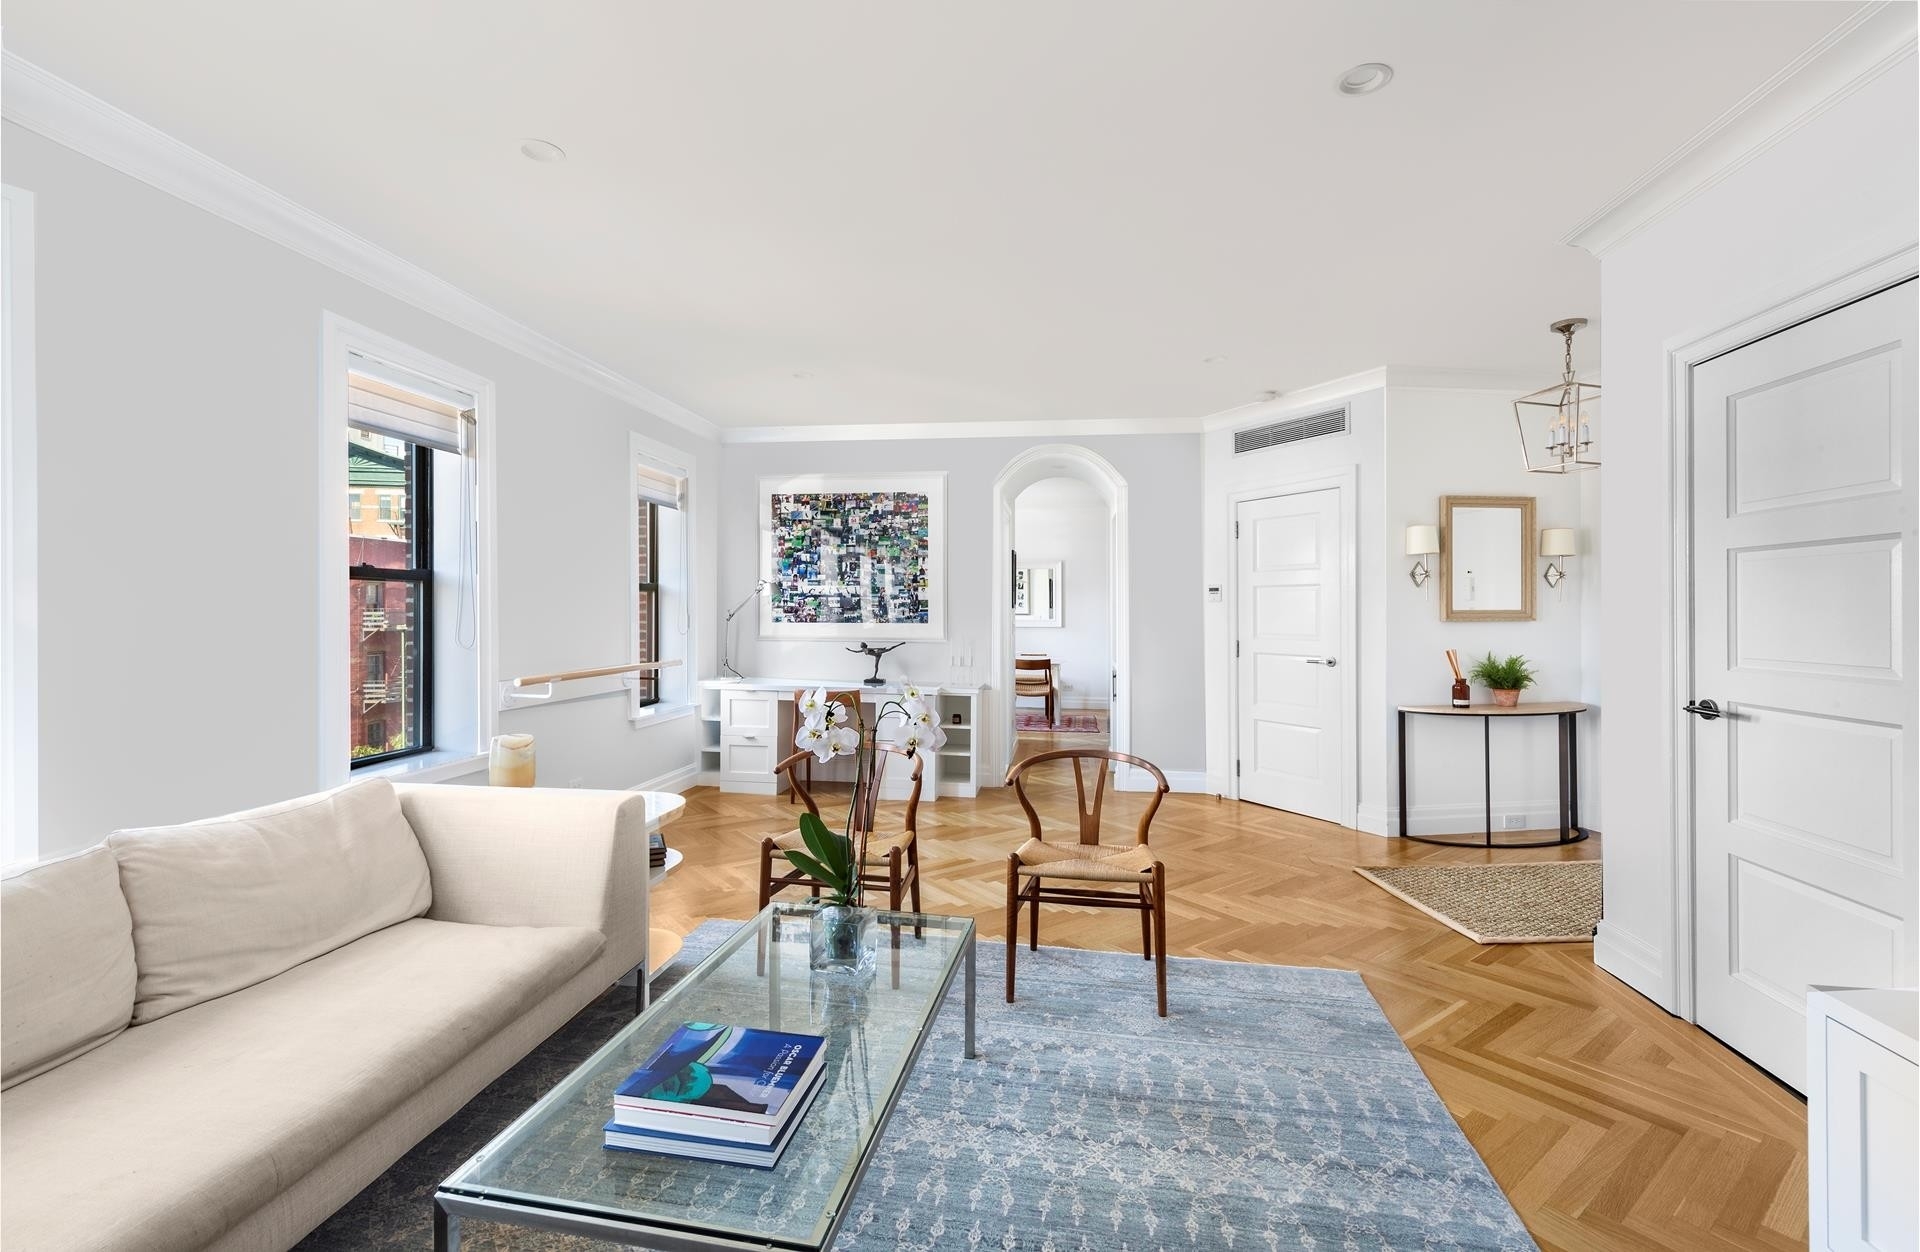 Co-op Properties for Sale at 295 W 11TH ST, 5C West Village, New York, NY 10014